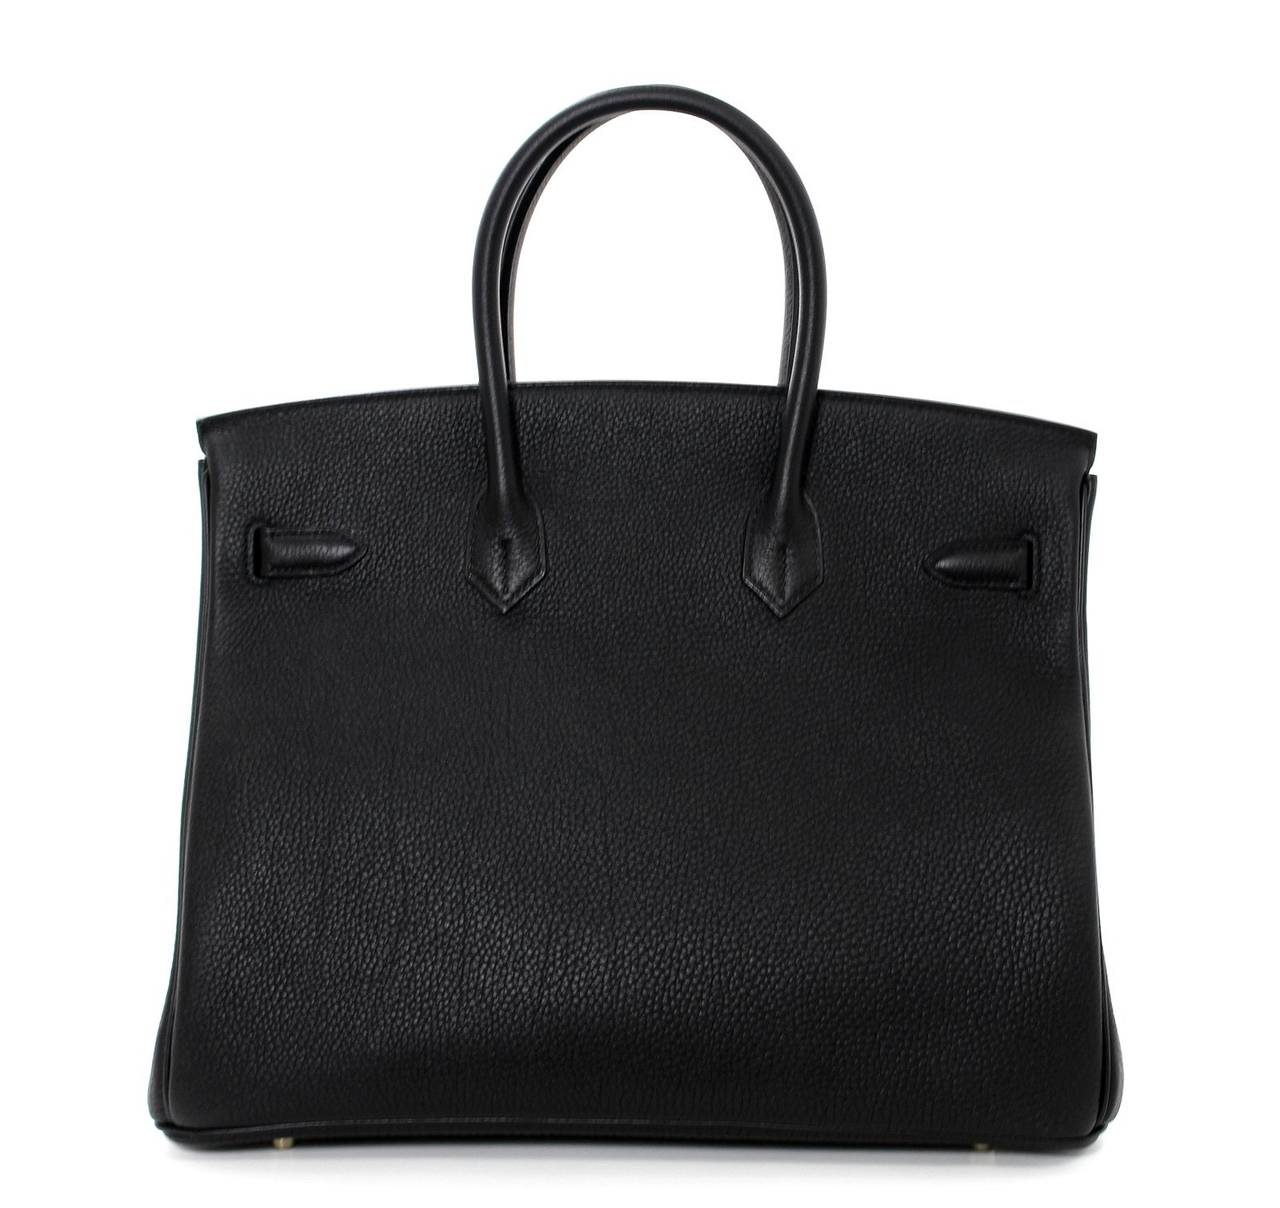 Pristine, store fresh condition (plastic on hardware) Hermès Horseshoe Birkin Bag in Black Togo Leather with Rose Jaipur, 35 cm size.   

Crafted by hand and considered by many as the epitome of luxury items, Birkins are extremely difficult to